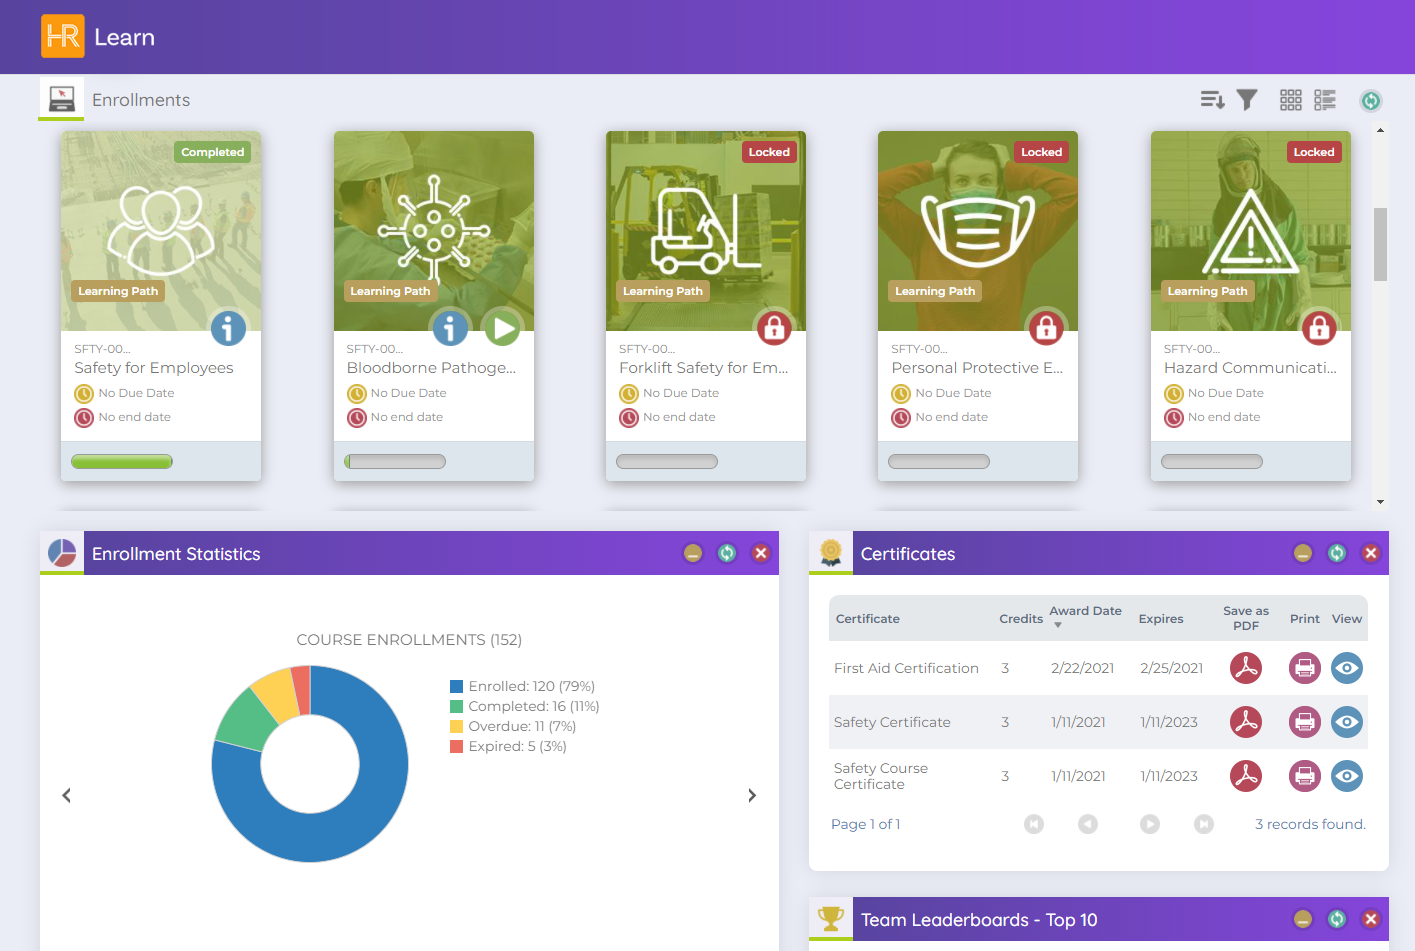 Track your team's enrollment, certificates, and training progress in one centralized dashboard.